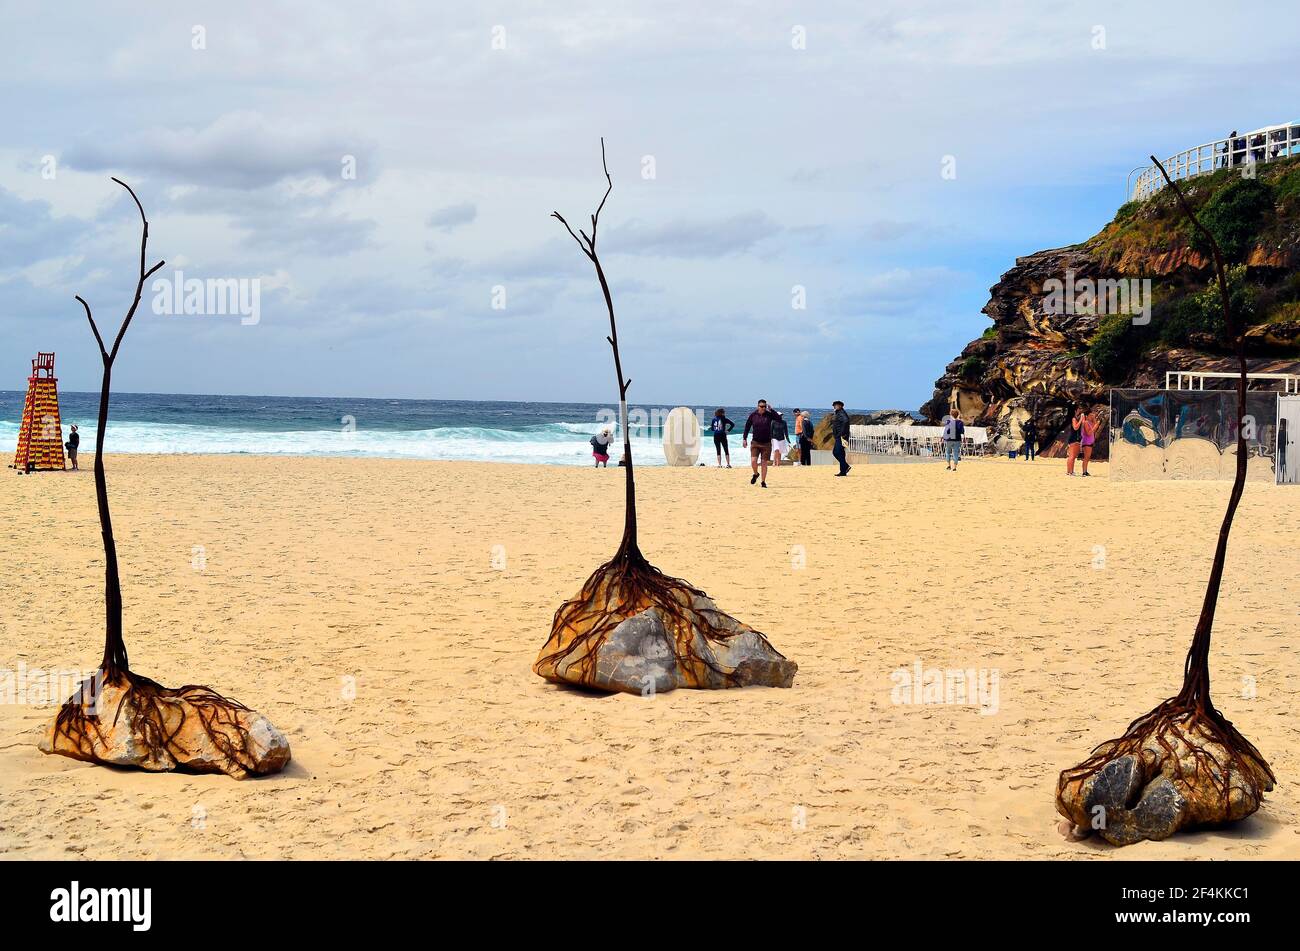 Sydney, NSW, Australia - October 31,2017: Unidentified people on beach of Tamarama by outdoor exhibition Sculpture by the Sea with different artworks Stock Photo